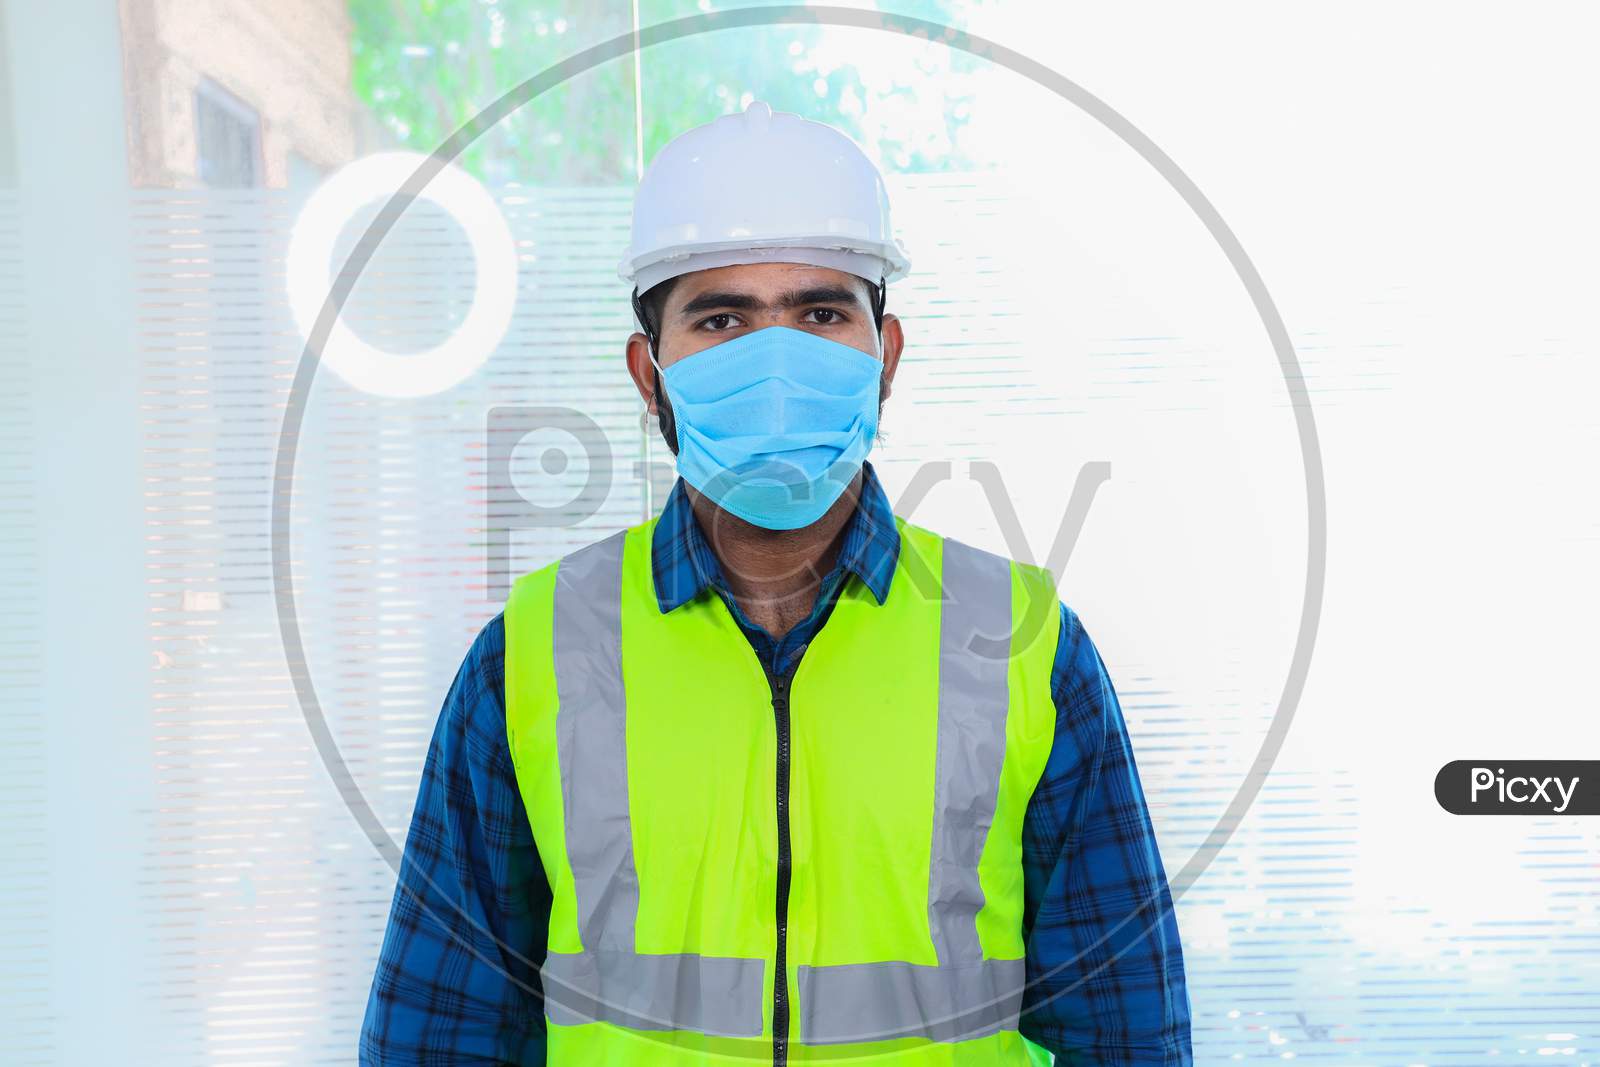 Young Engineer Wearing Mask, Closeup Of Beard Man Wearing Blue Shirt With Yellow Vest And Ywhite Helmet, Back To Work After Lockdown Ends Due To Covid-19 Pandemic, New Normal Lifestyle